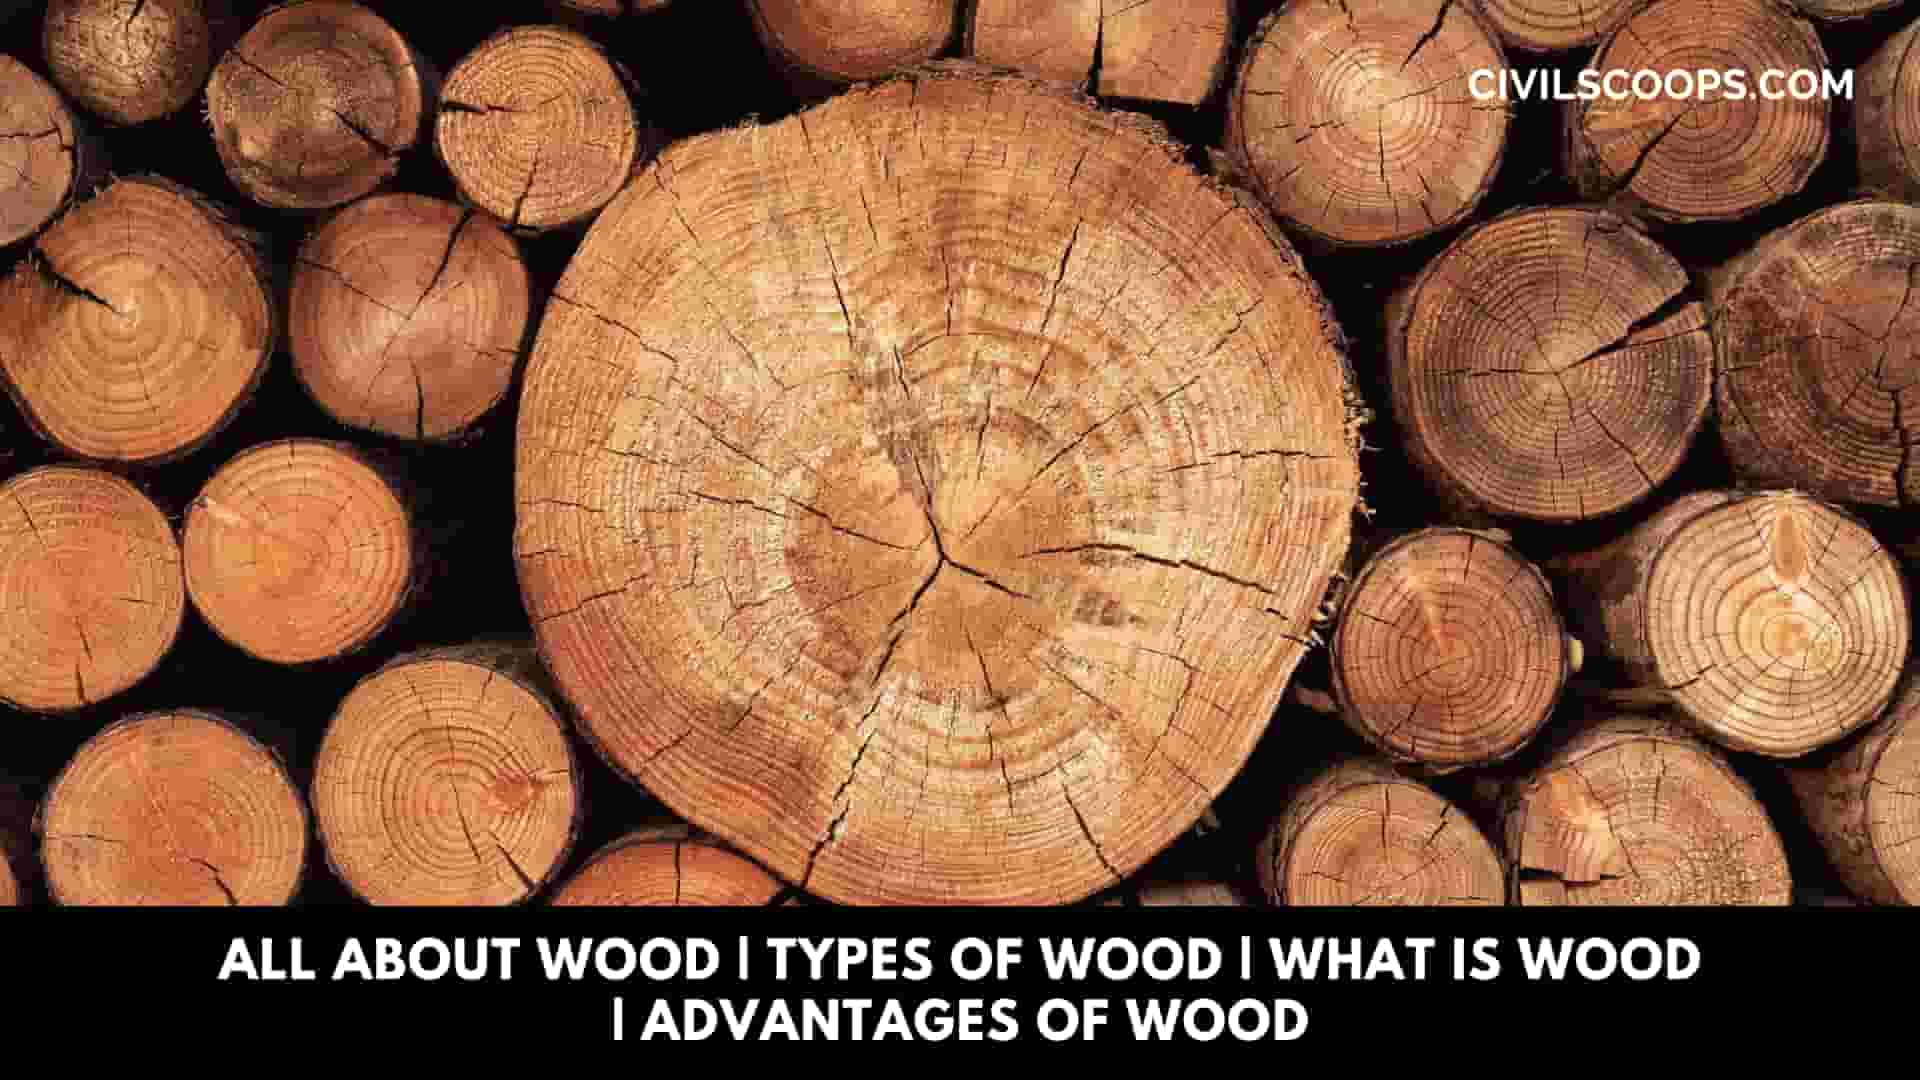 All About Wood | Types of Wood | What Is Wood | Advantages of Wood